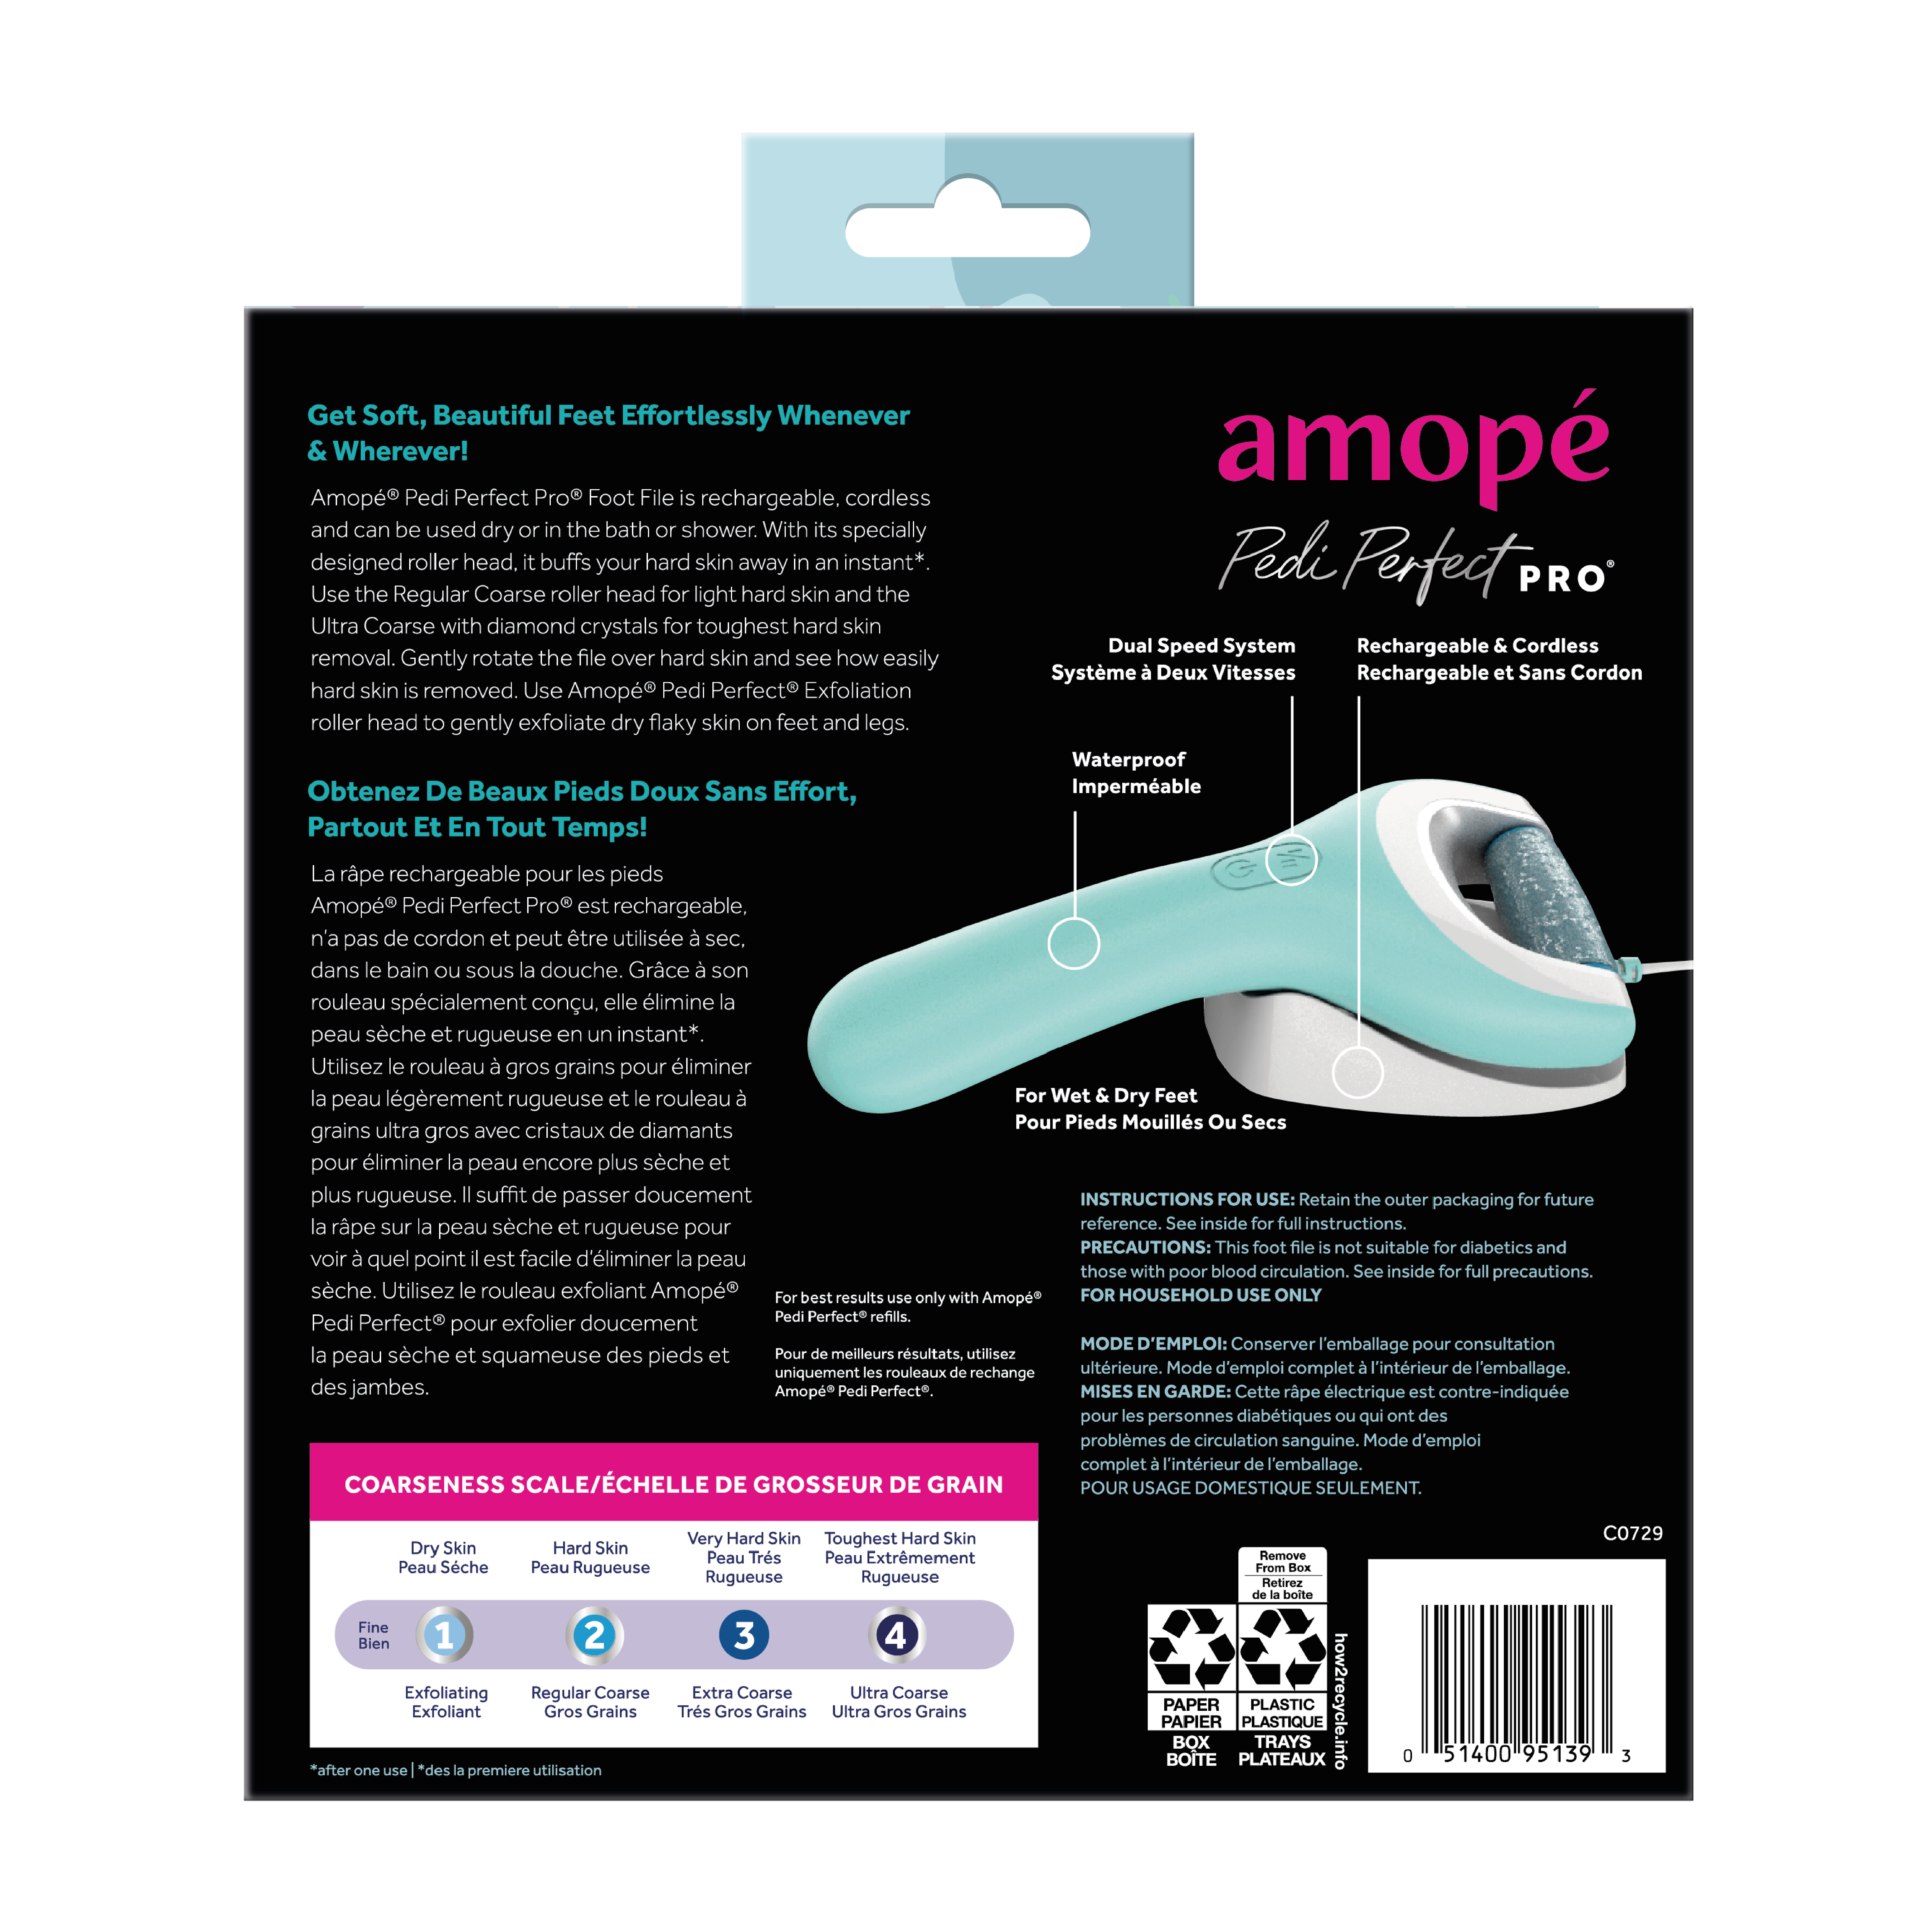 Amope Pedi Perfect Pro Rechargeable Foot File for Feet, Hard and Dead Skin - image 3 of 11